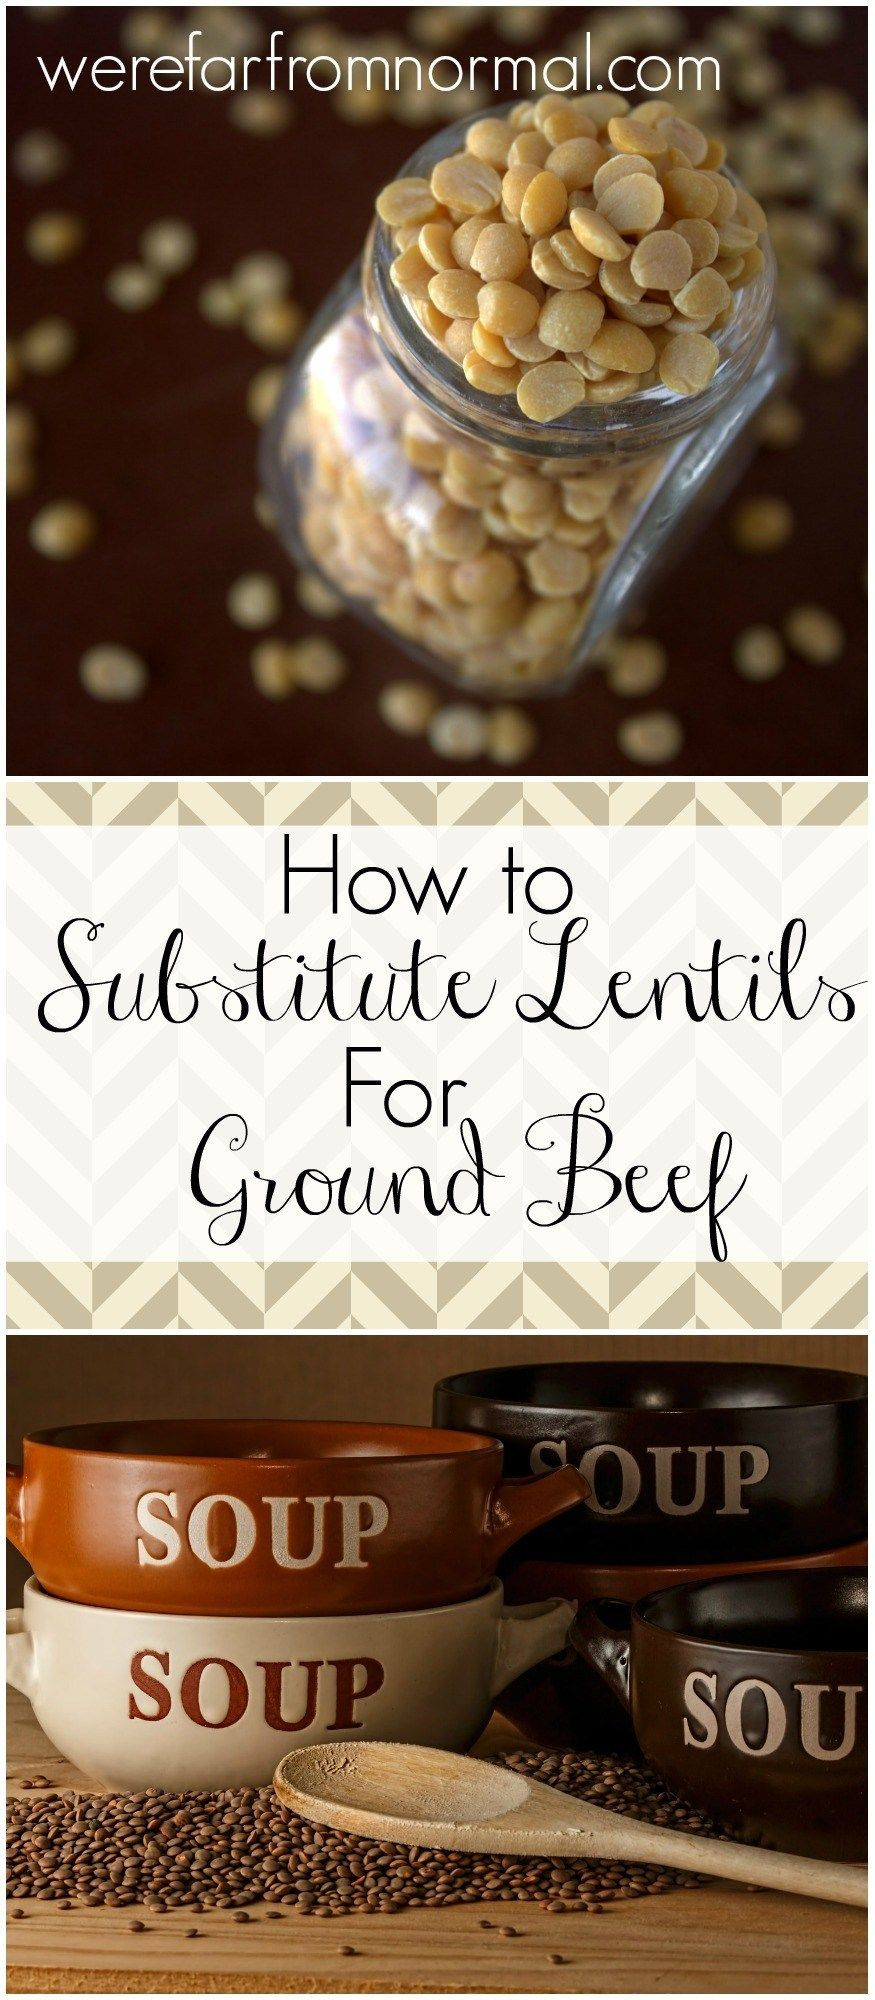 Vegetarian Ground Beef Substitute
 How to Substitute Lentils for Ground Beef in Any Recipe